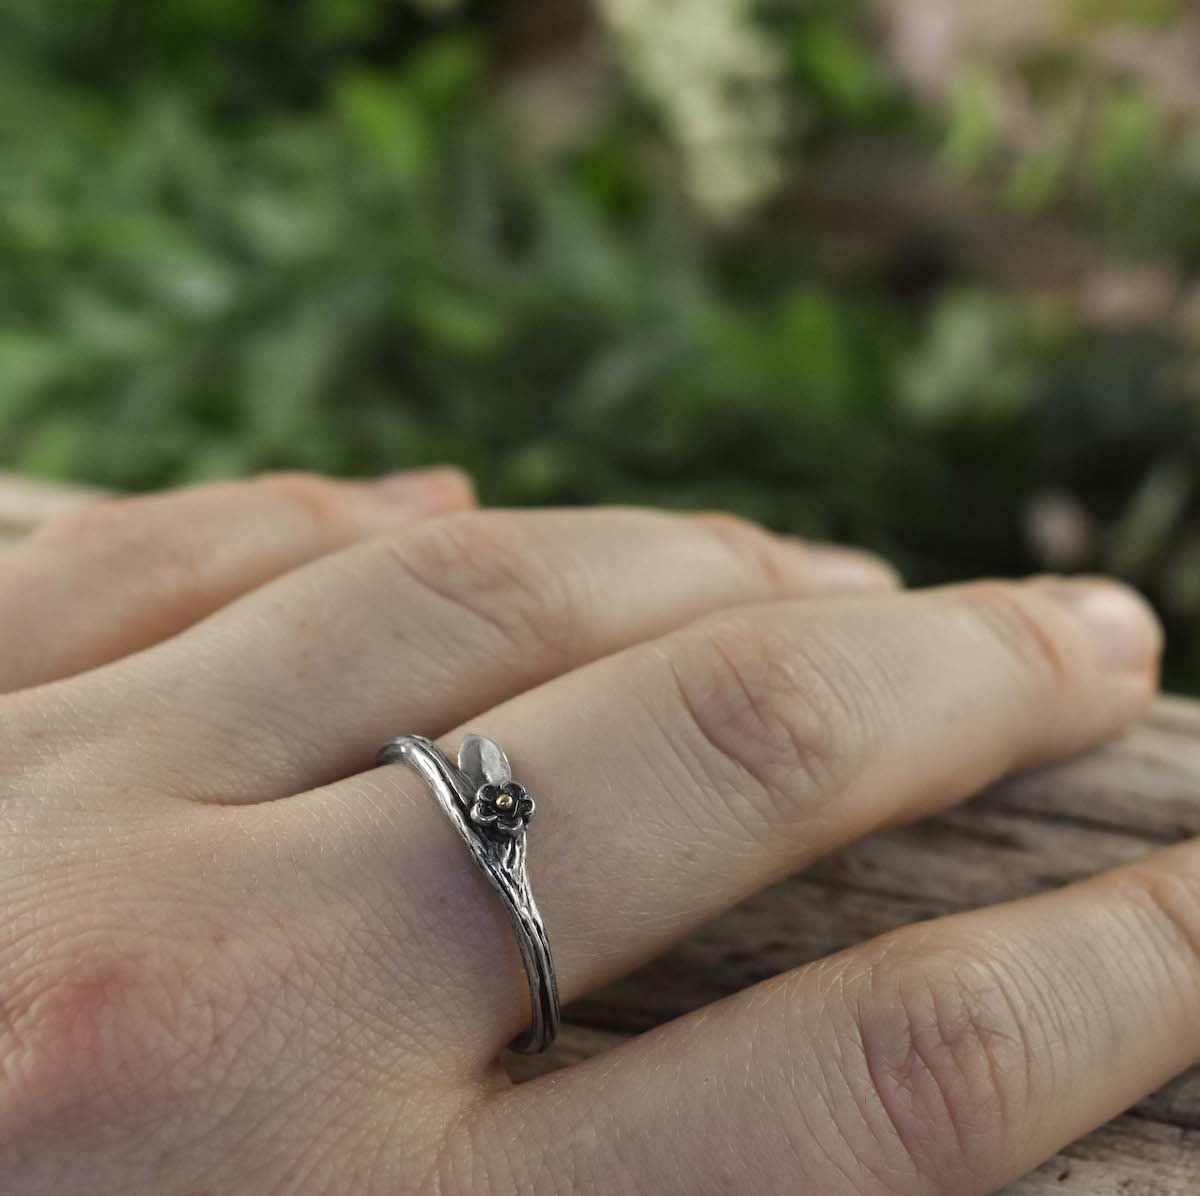 Silver Spring Twig Ring - Wedding Ring  Select Size  4 2681 - handmade by Beth Millner Jewelry